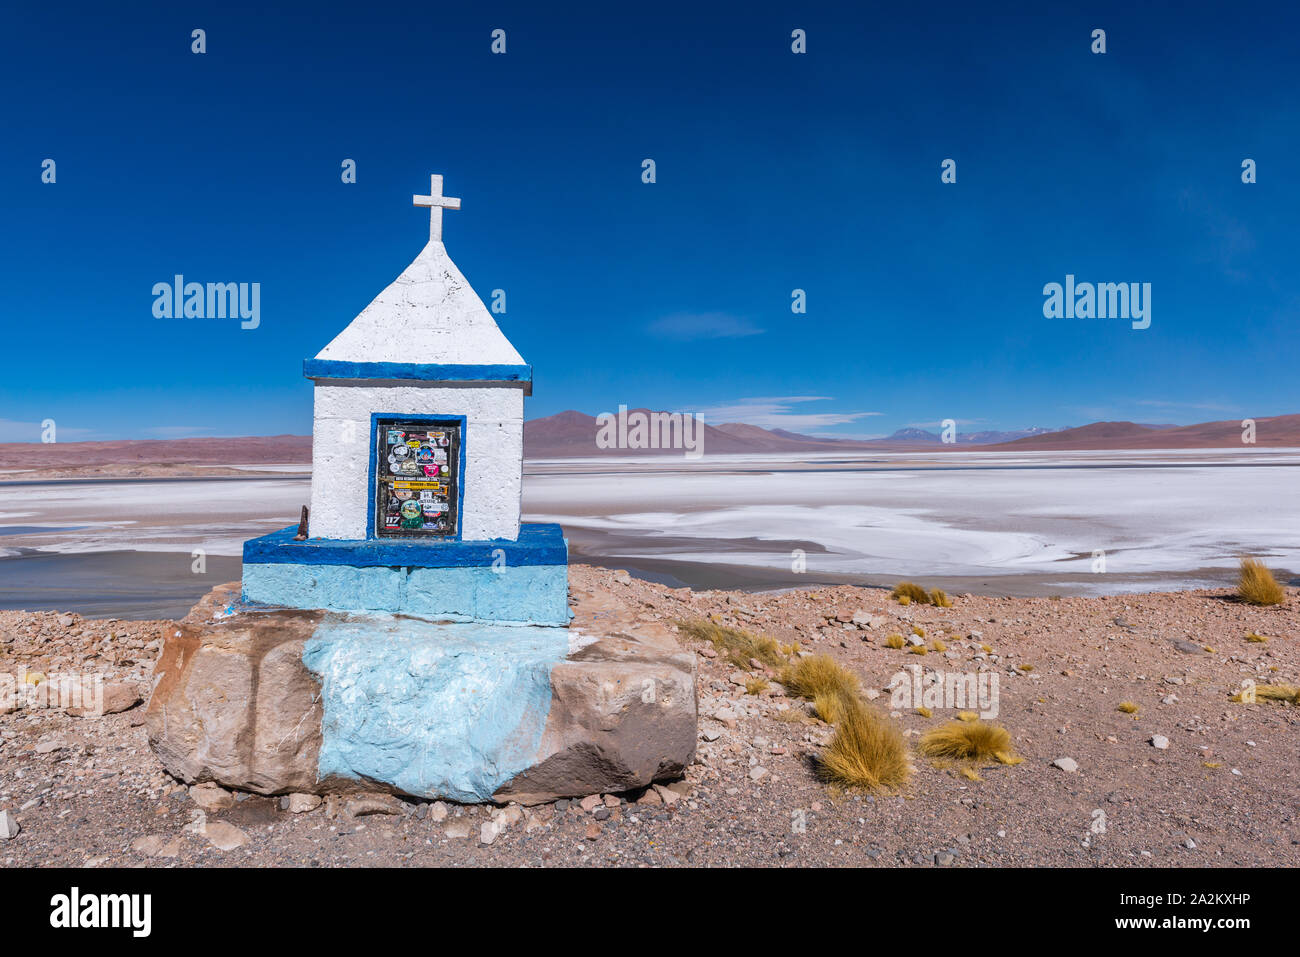 Along the National Road from San Pedro de Atacama, Chile, to the Argentine border town of Jama, Republic of Chile, Latin America Stock Photo